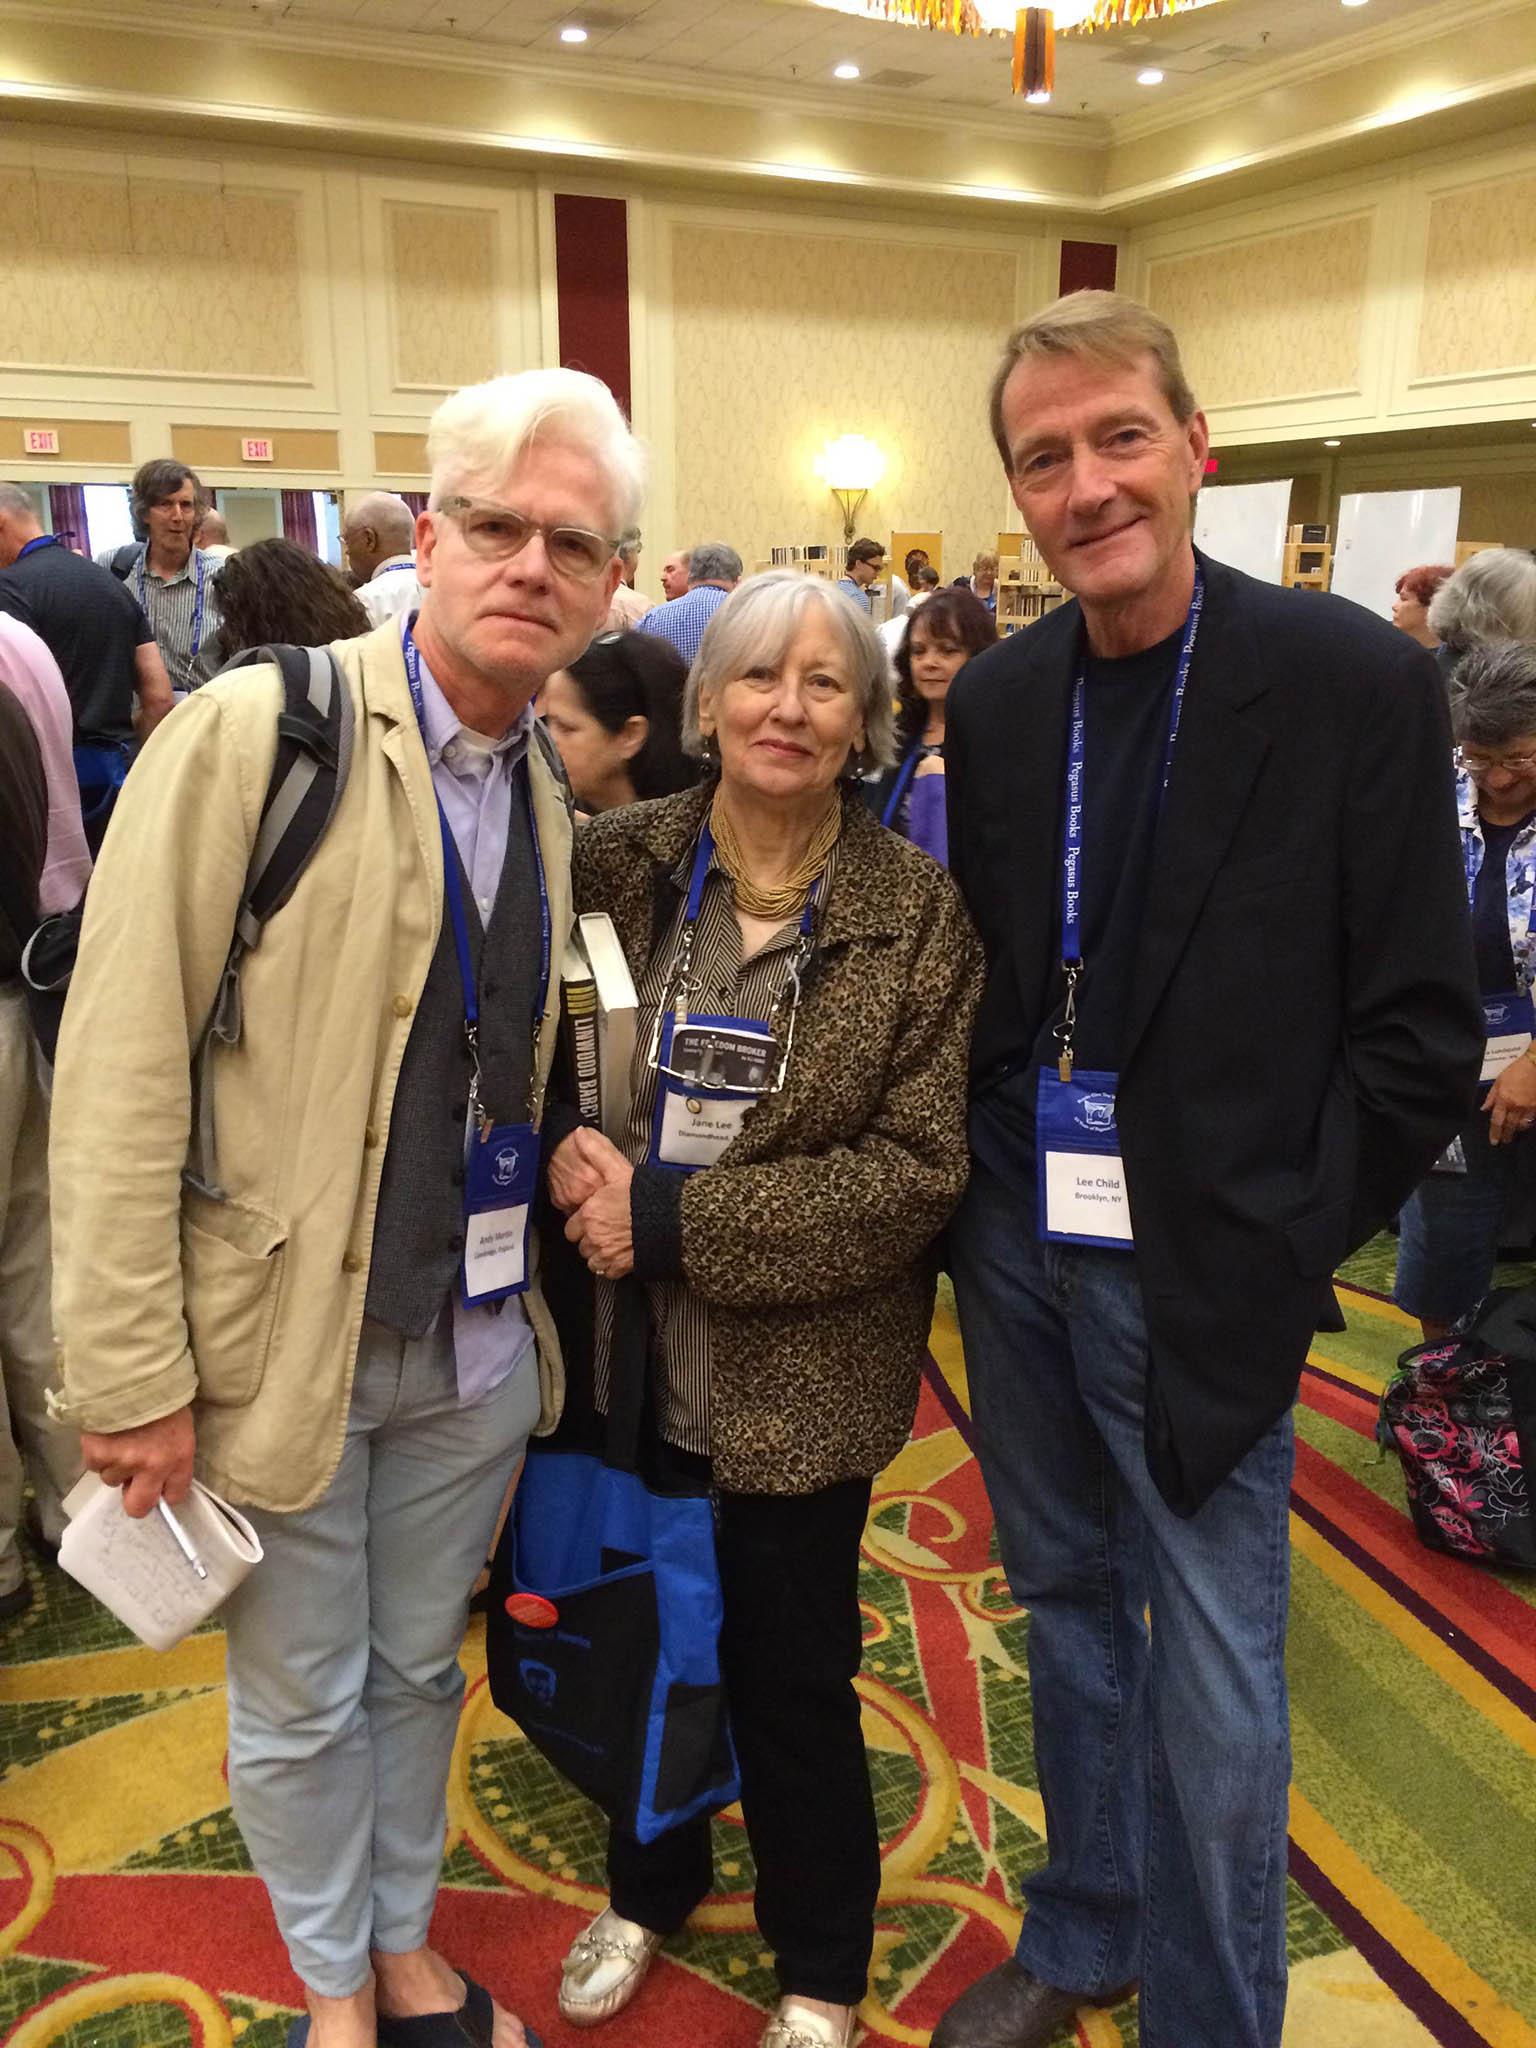 Andy Martin (left) with author Lee Child and a fan, Jane